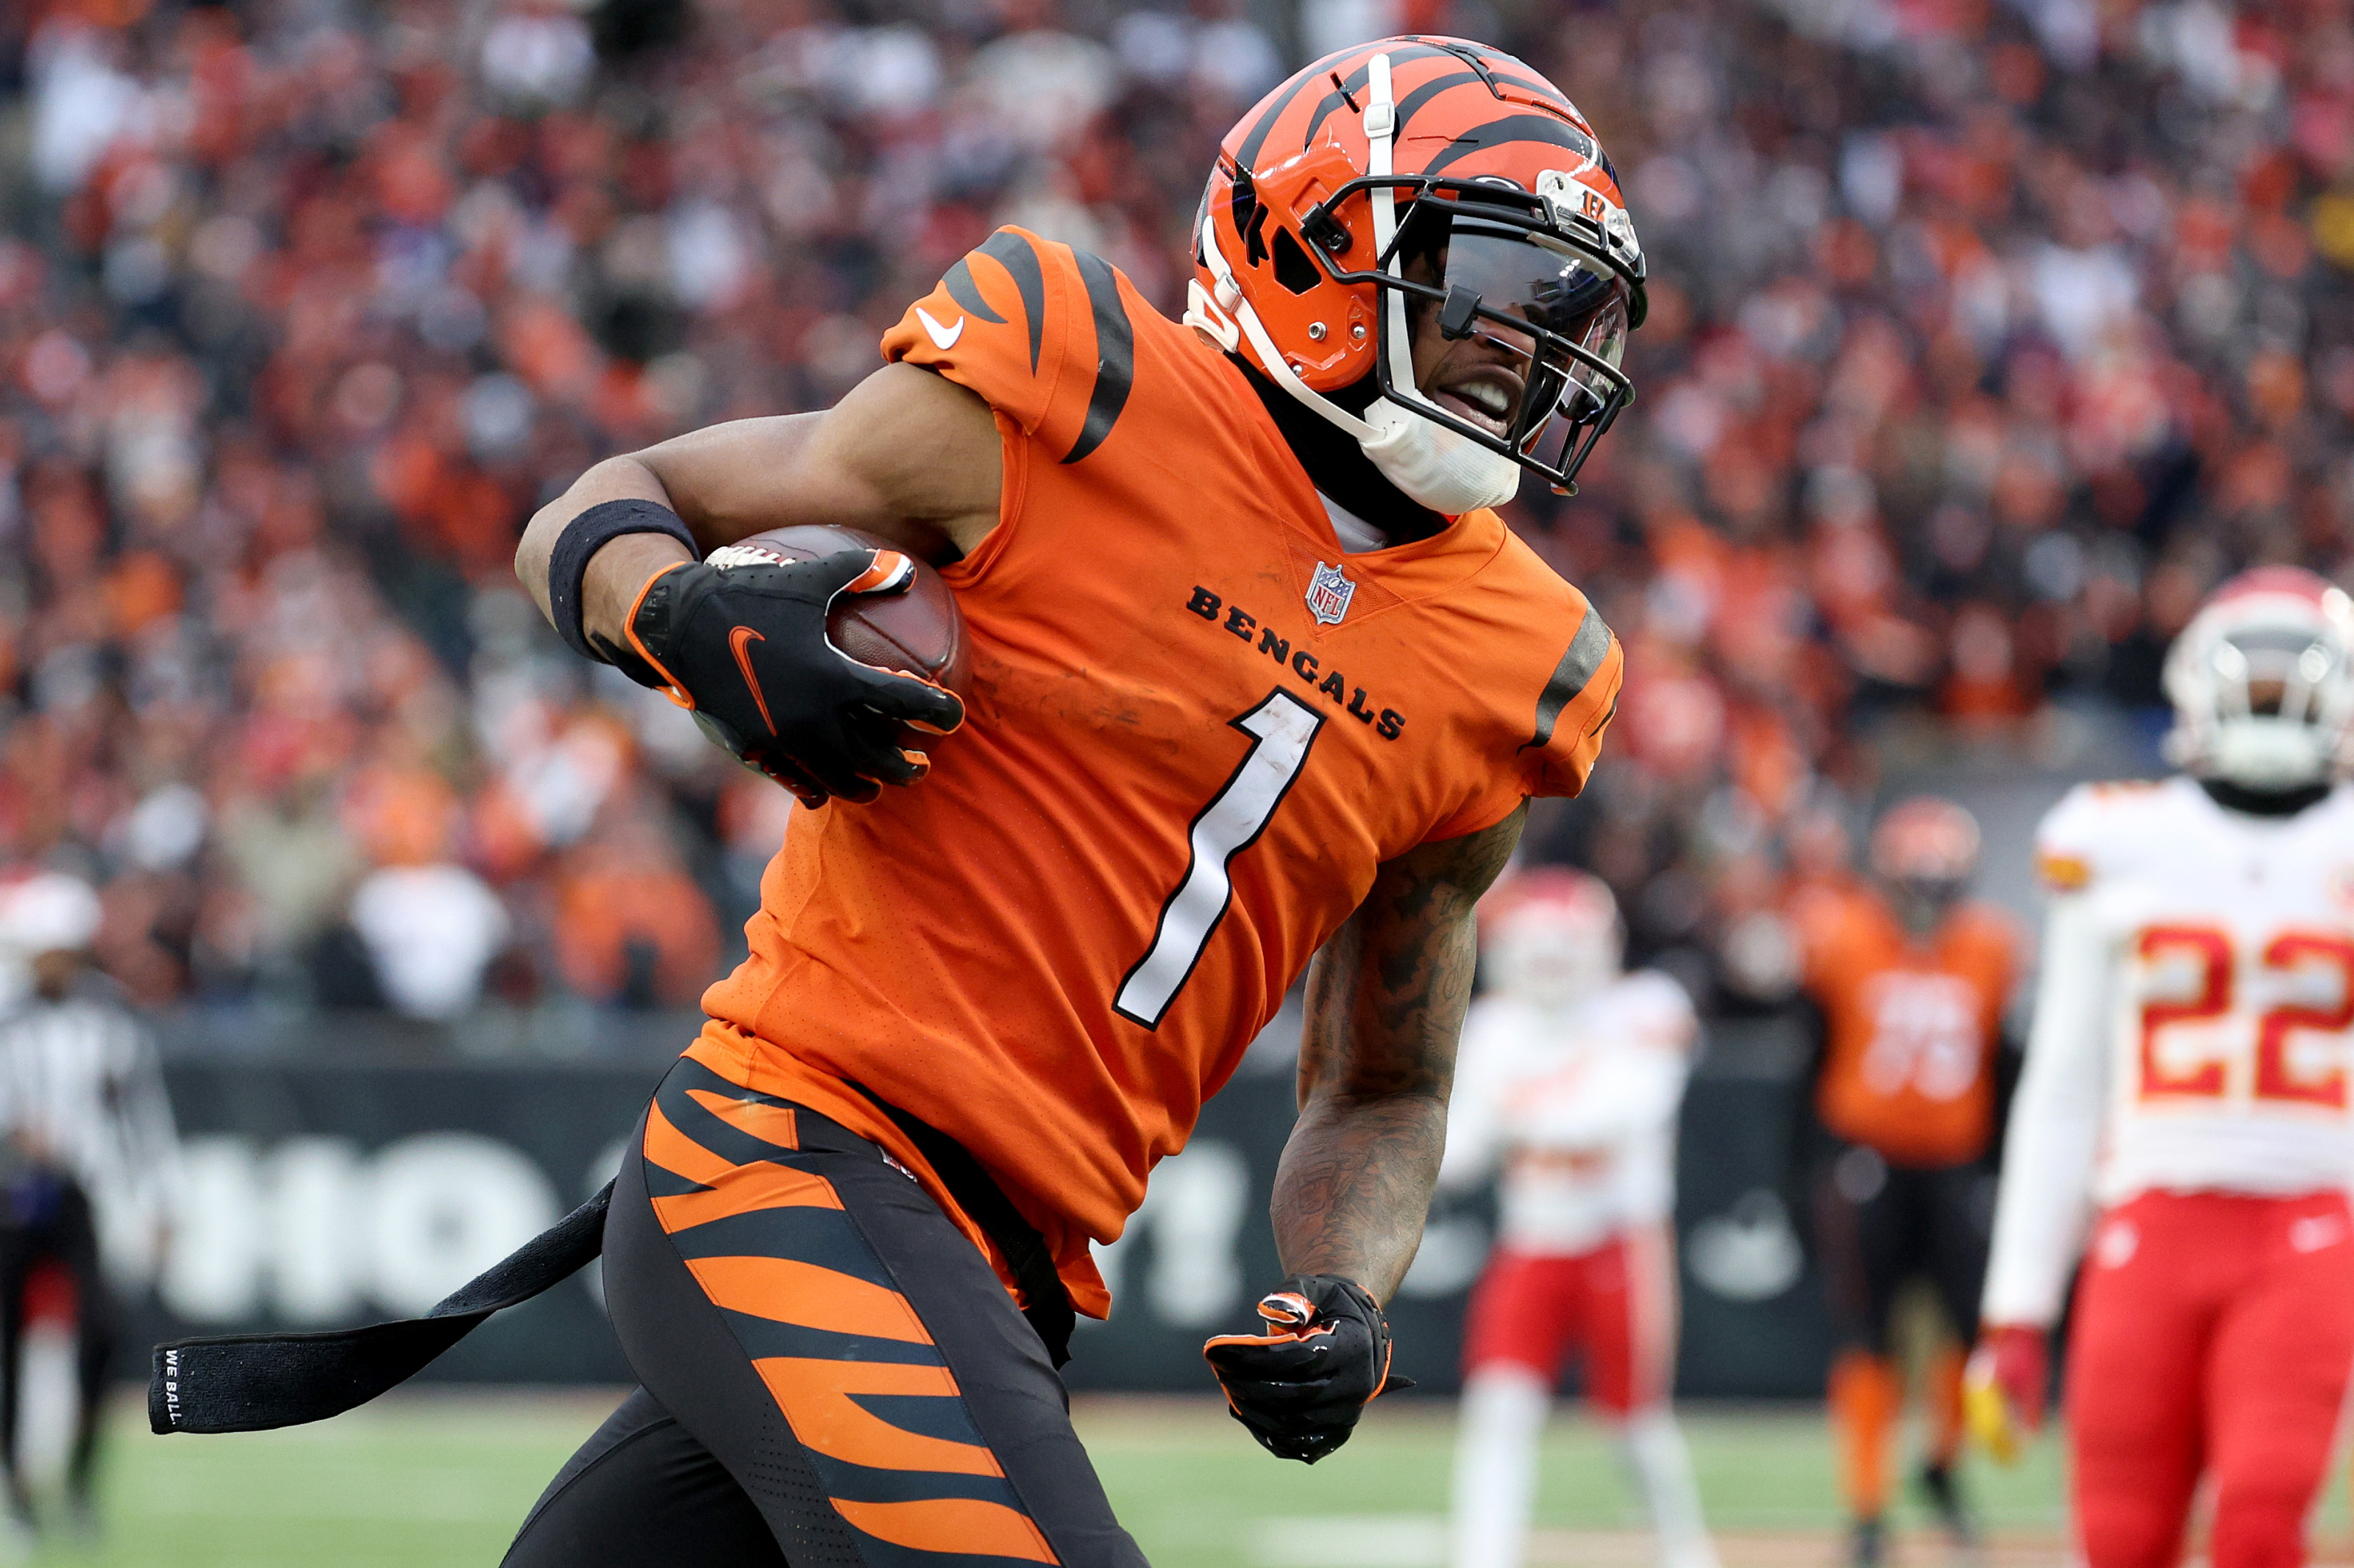 Bengals prove they were right taking WR over OT in the 2021 NFL Draft